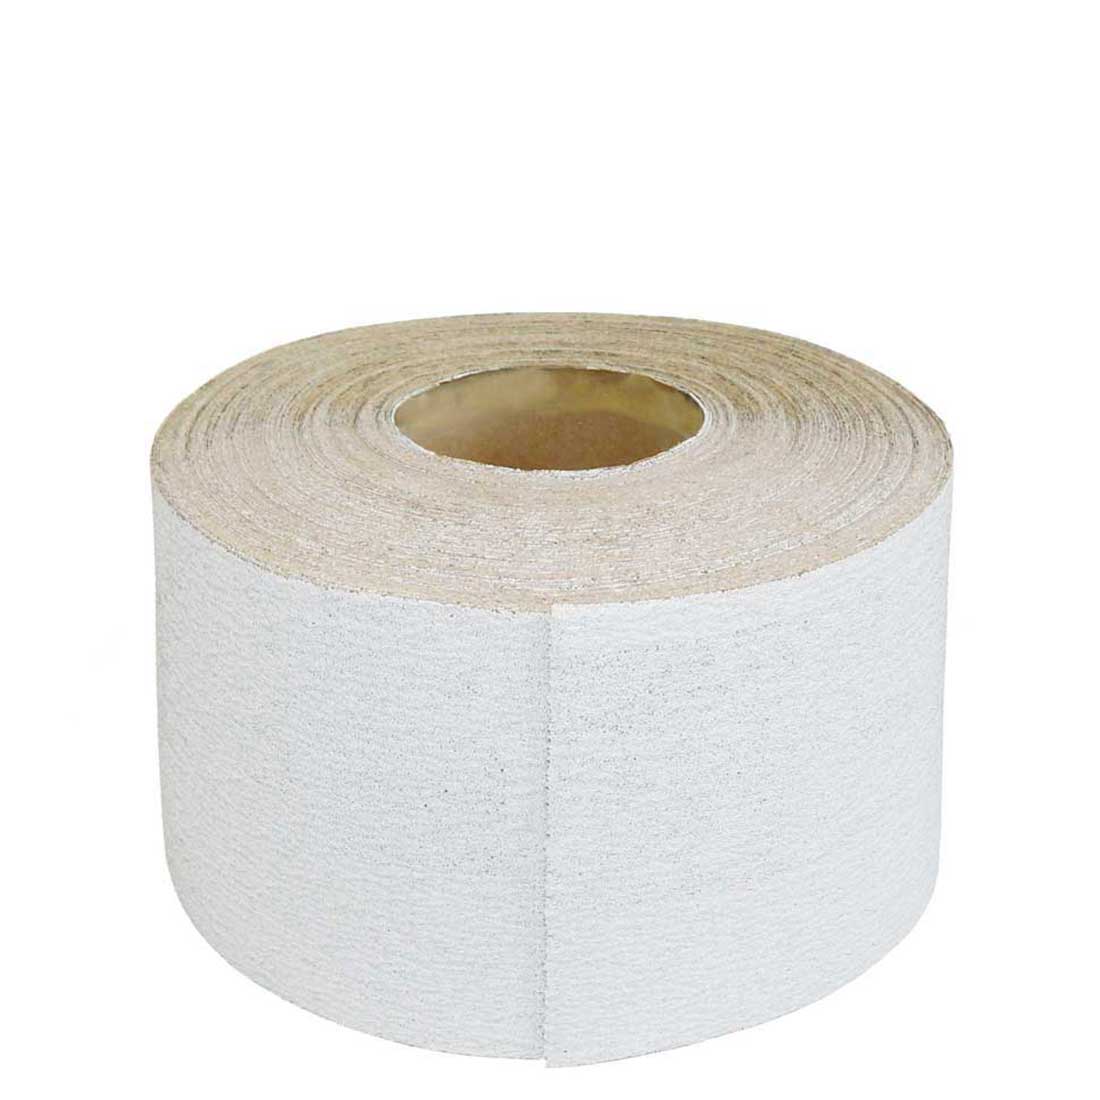 MioTools sanding paper roll for hand sanders, G40–400, 115 mm x 50 m / stearated aluminium oxide